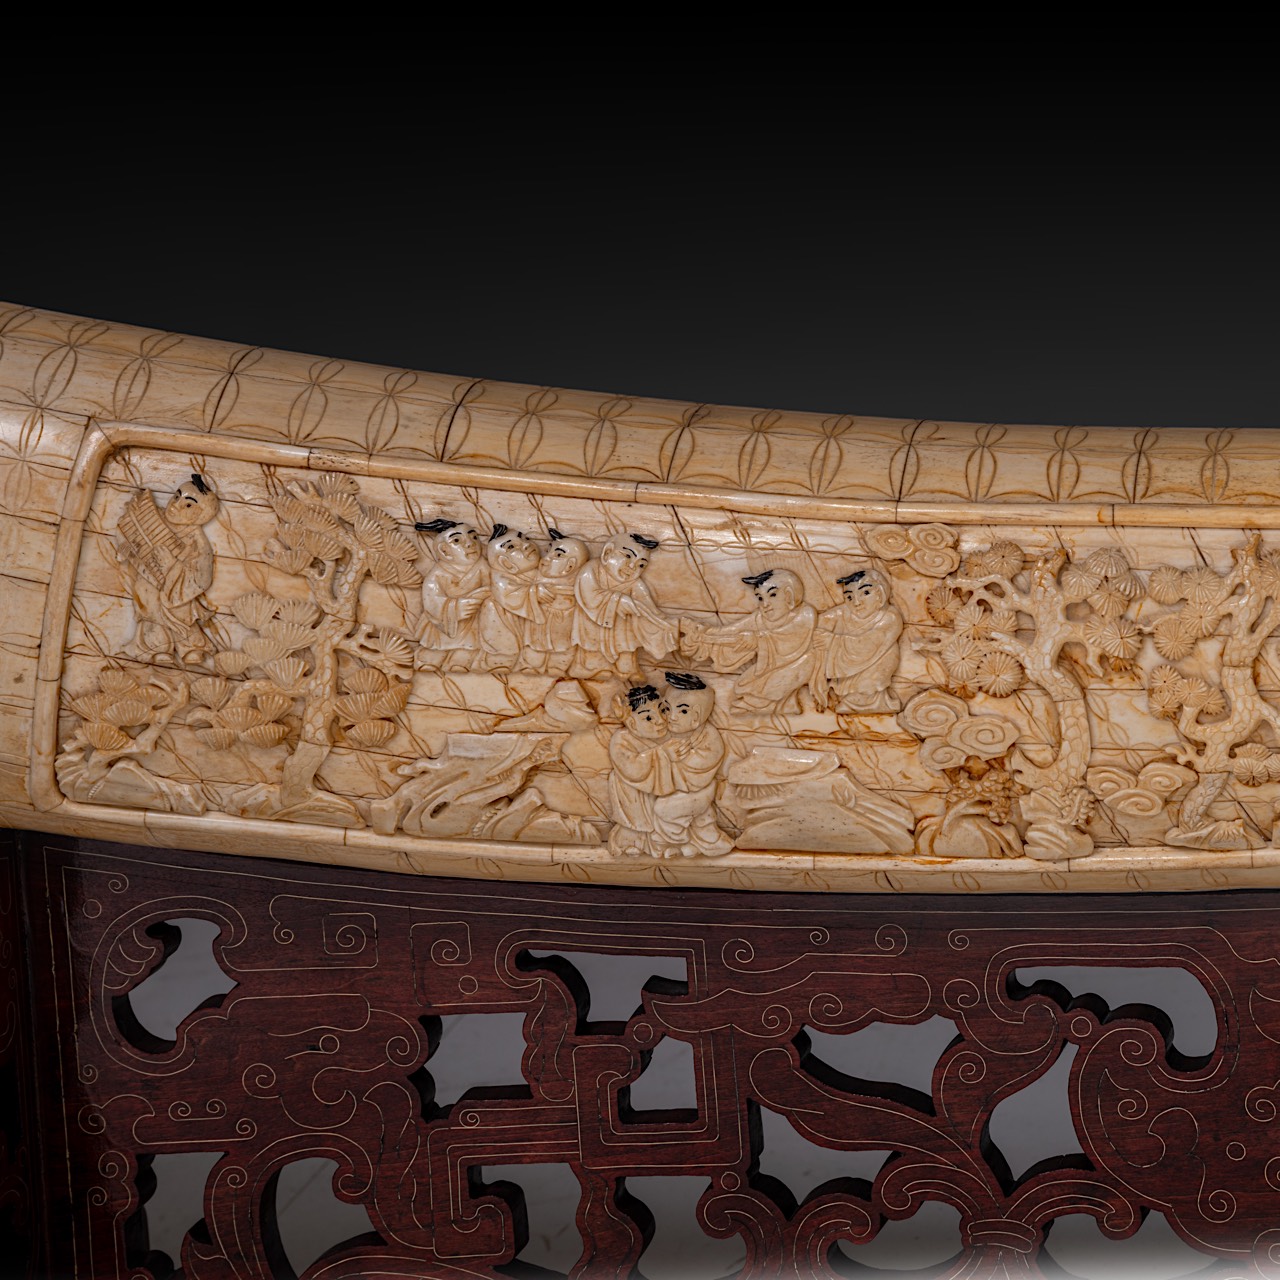 Tusk made from sculpted bone slats, Qing/Republic period, inner arch 165 cm - outer arch 175 cm - Image 8 of 13